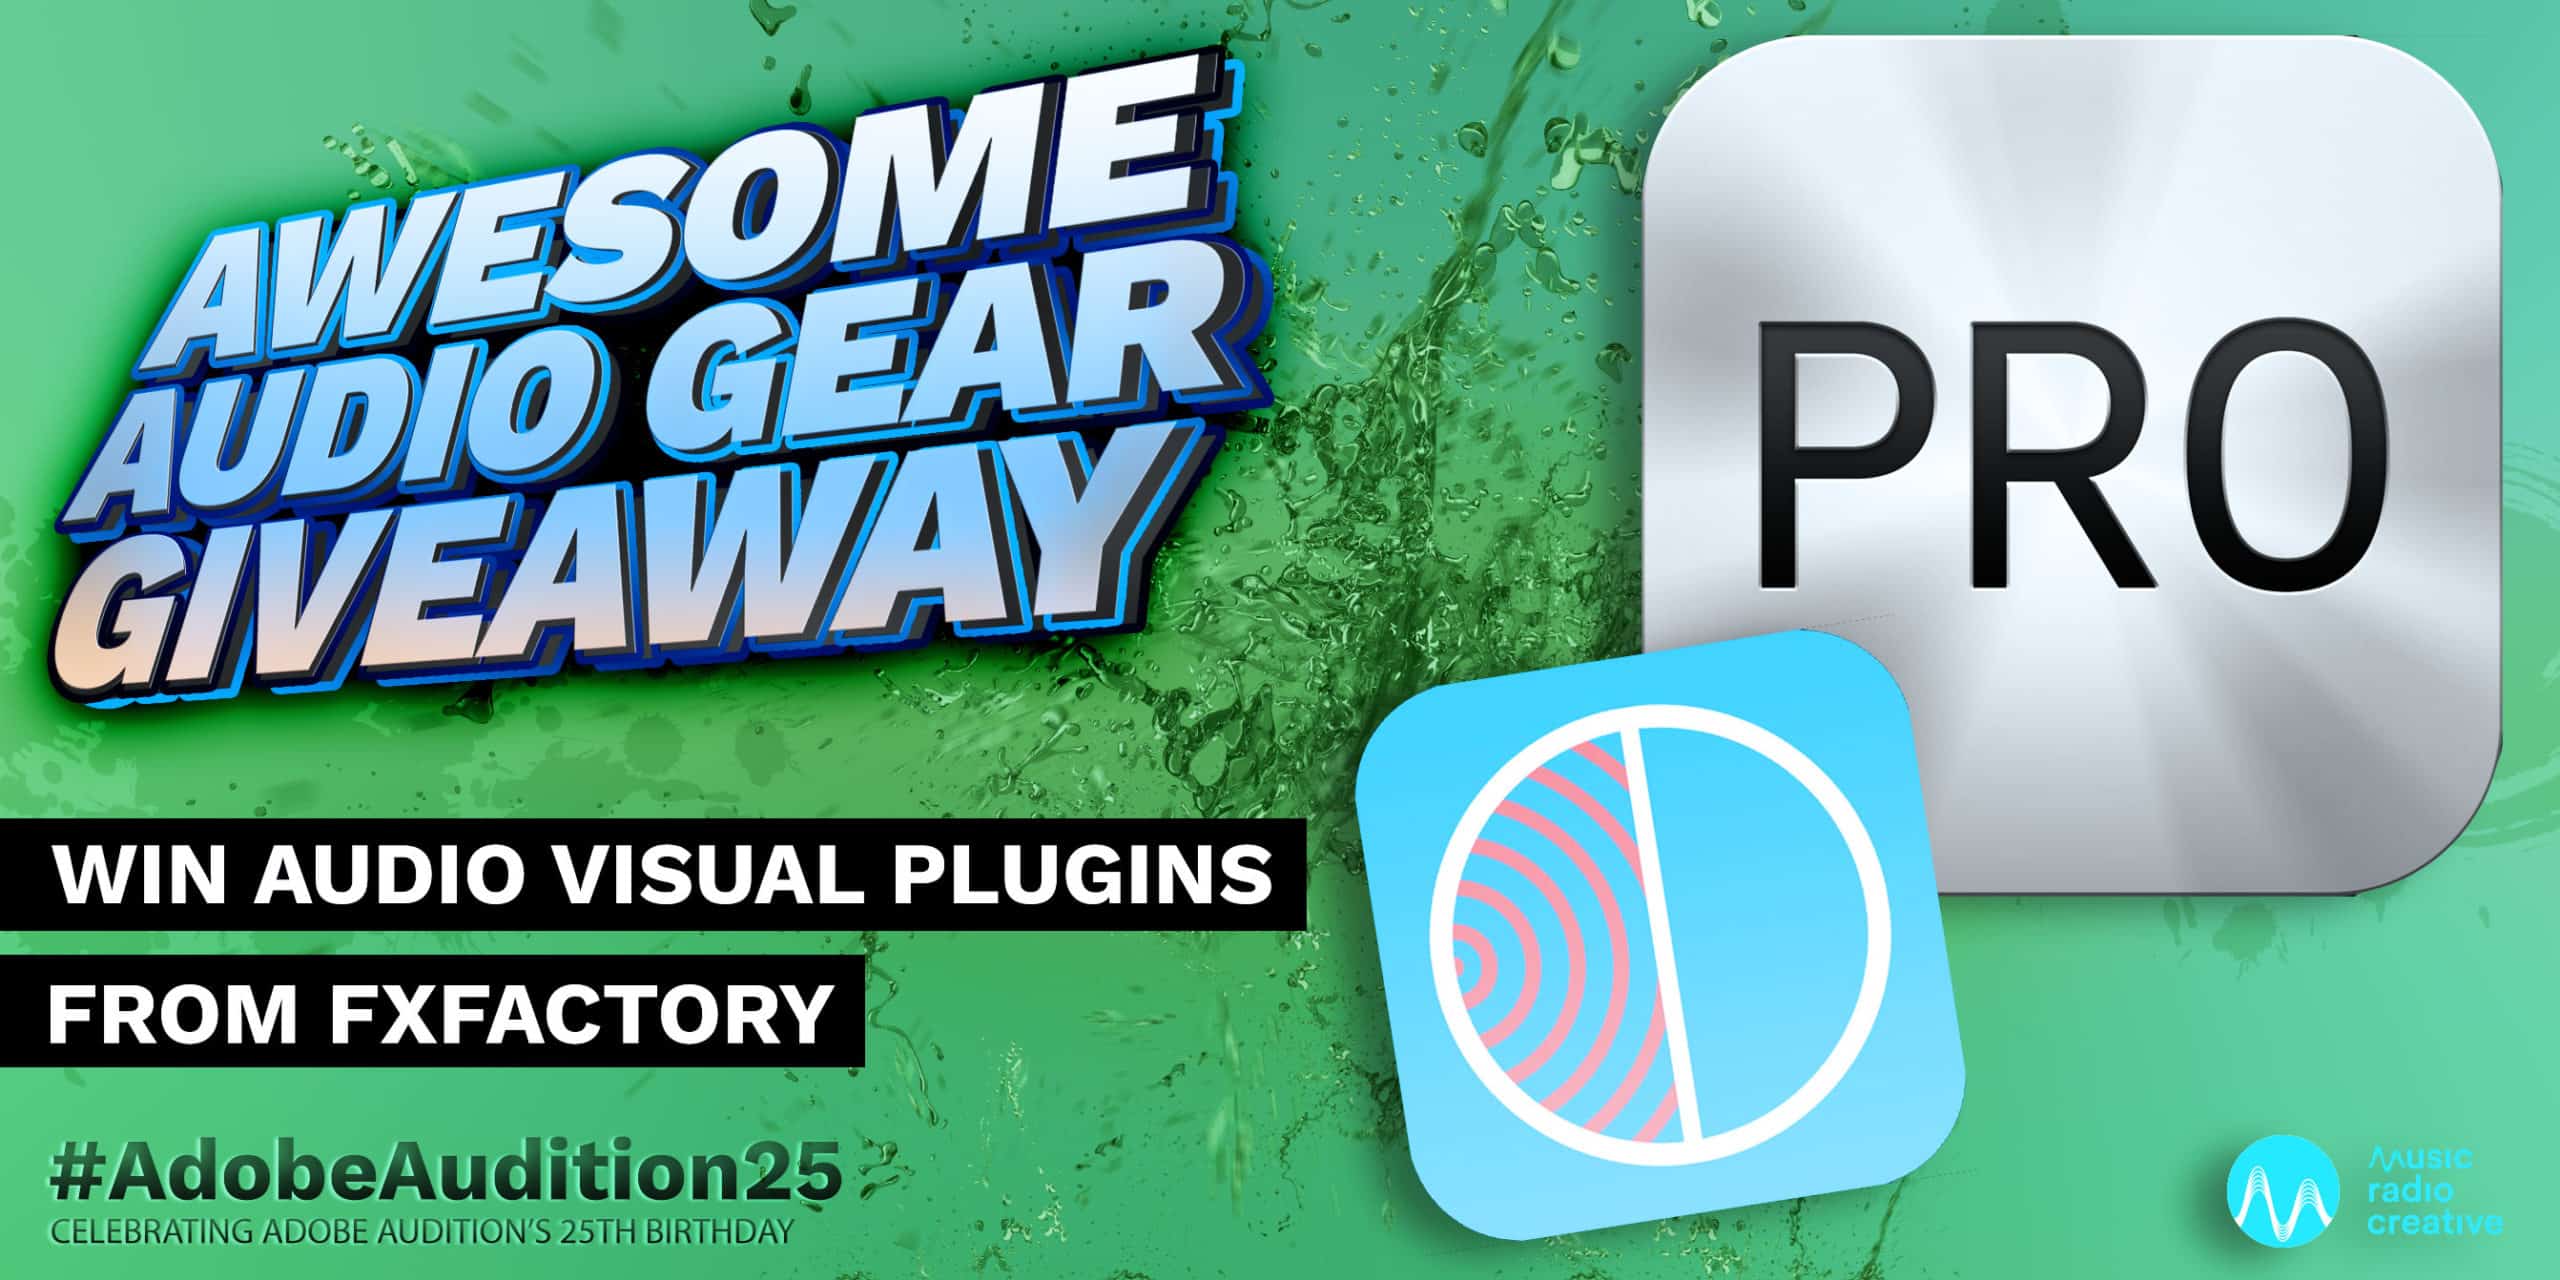 Win Audio Visual Plugins from FxFactory Awesome Audio Gear Giveaway  Music Radio Creative